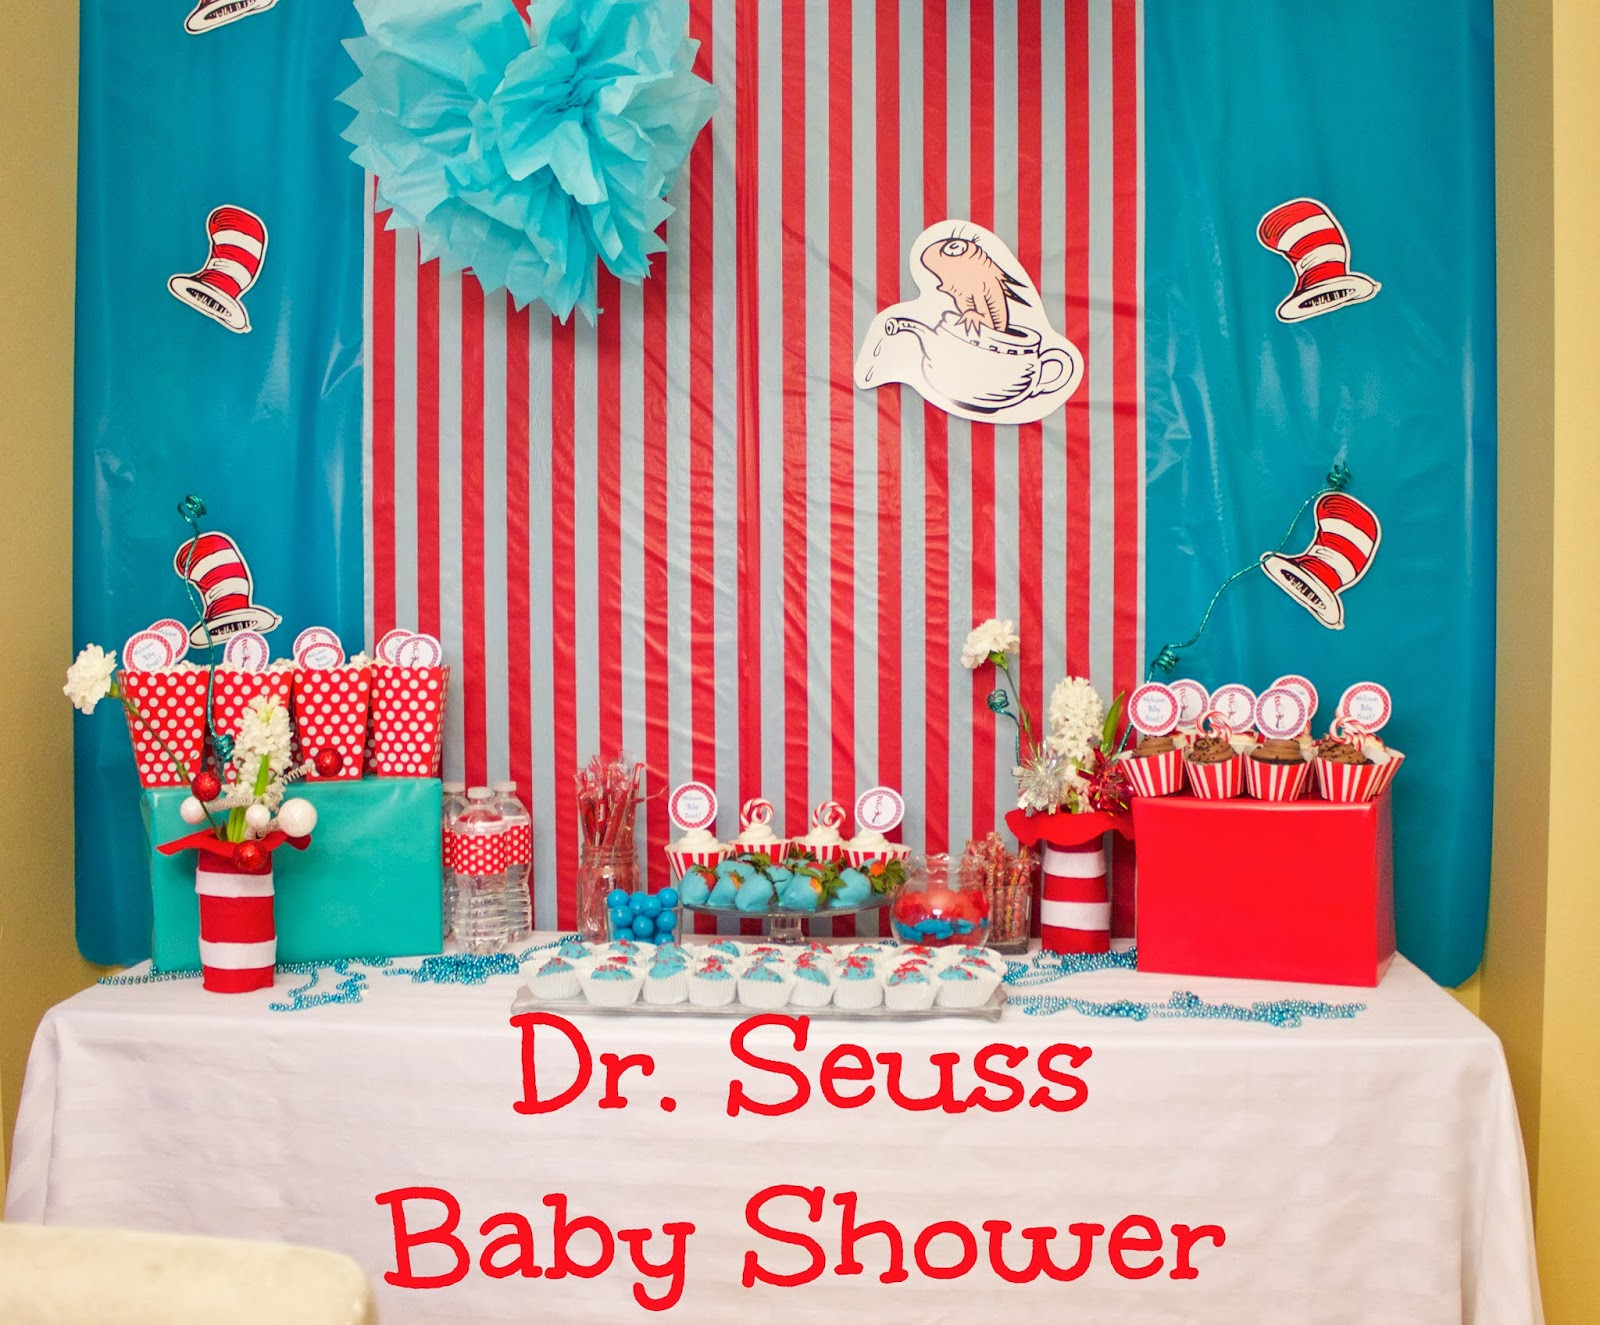 Dr Seuss Baby Shower Decor
 Sowdering About Dr Seuss Baby Shower